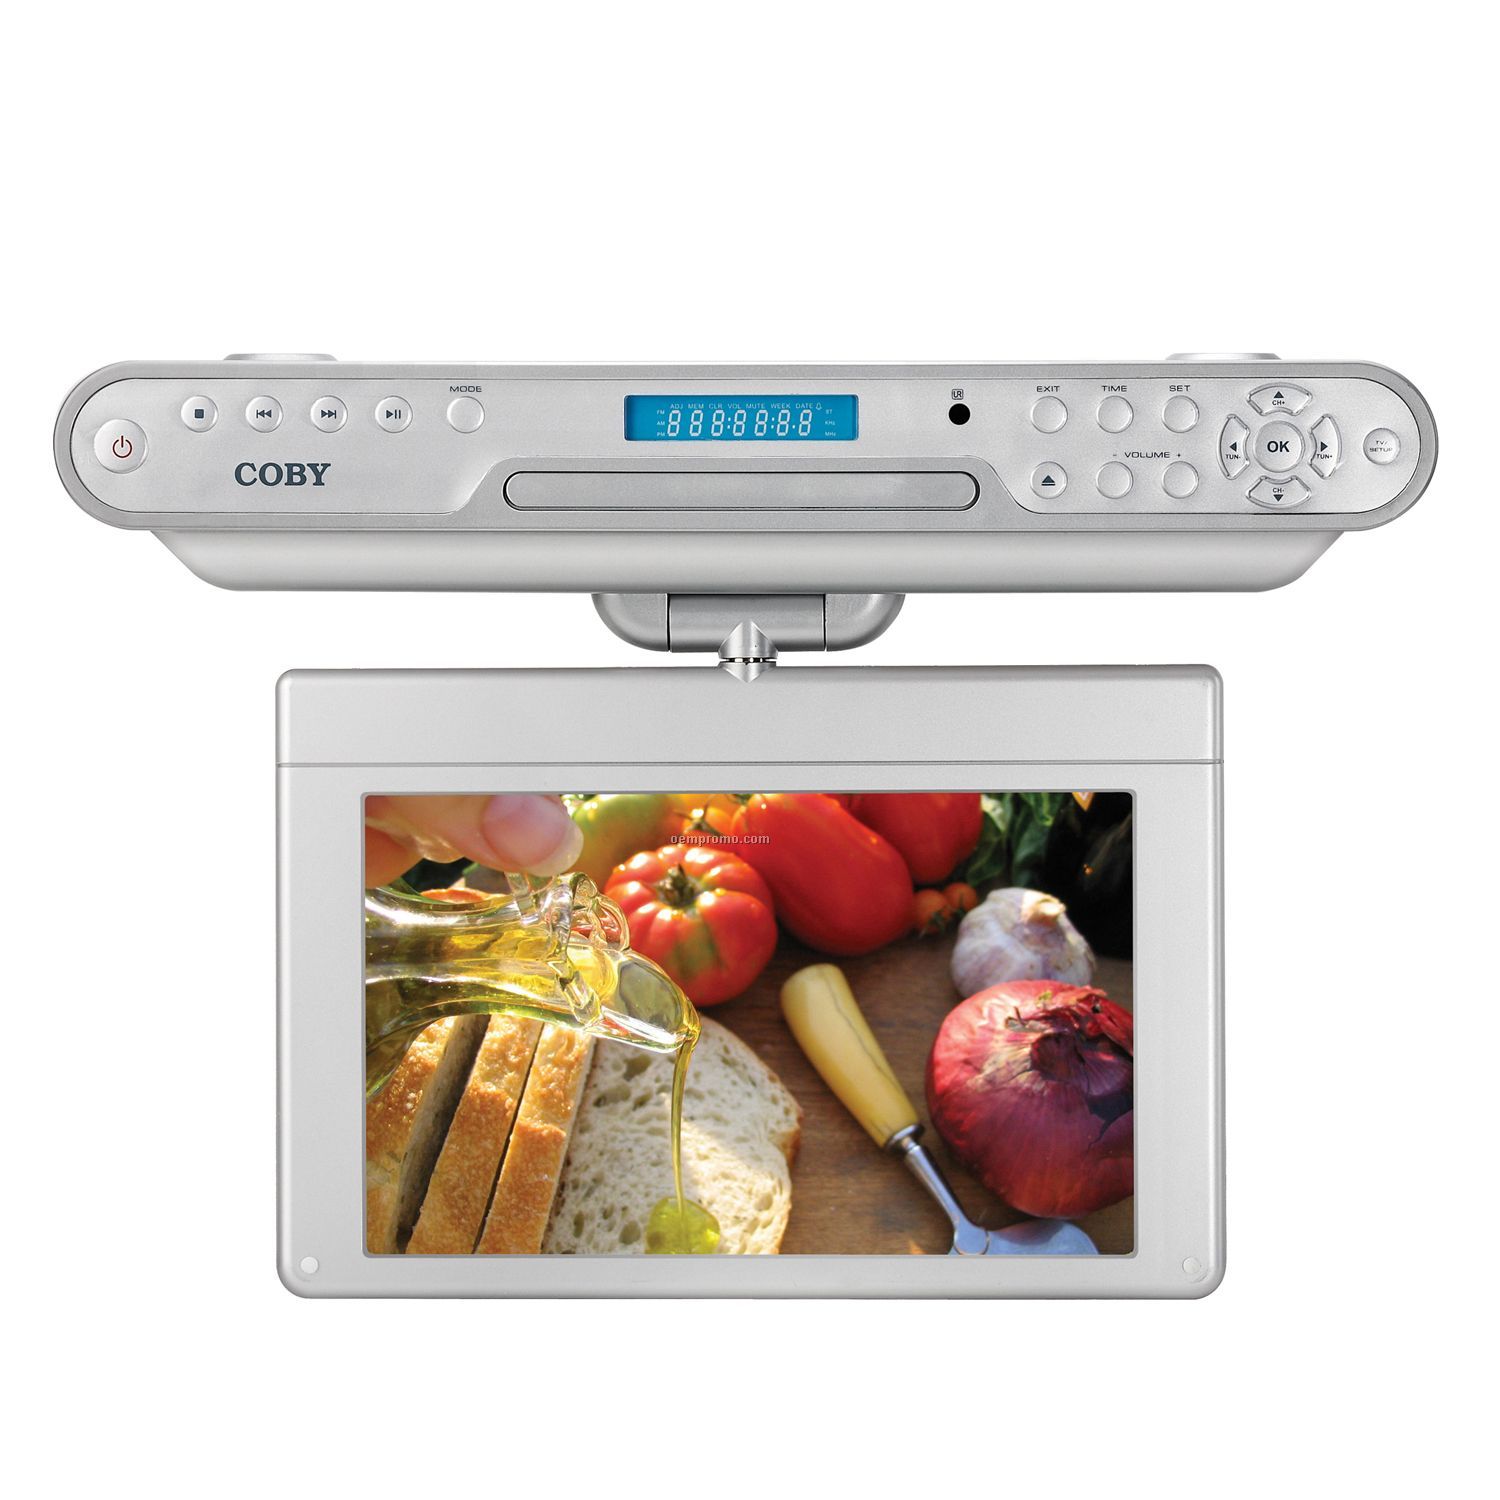 Coby 7" Under-counter DVD Player